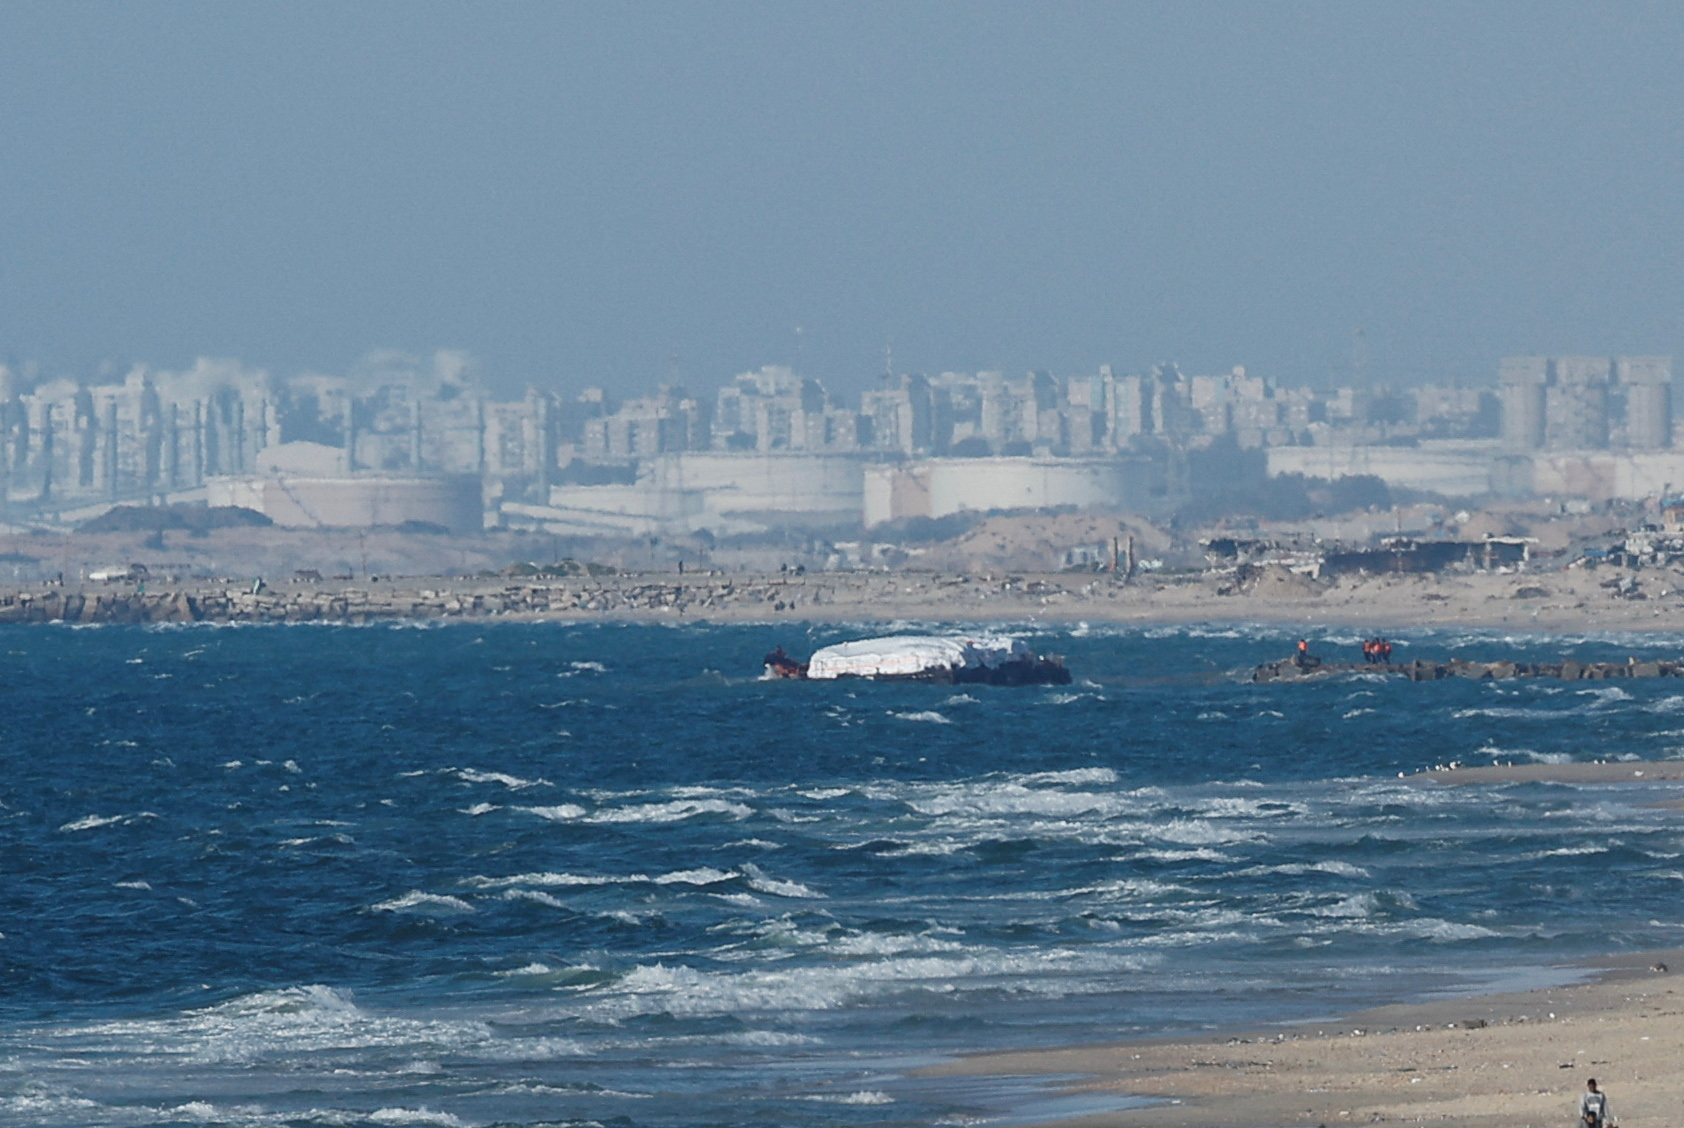 Aid delivered by the Open Arms vessel arrives off the coast of Gaza on March 15.